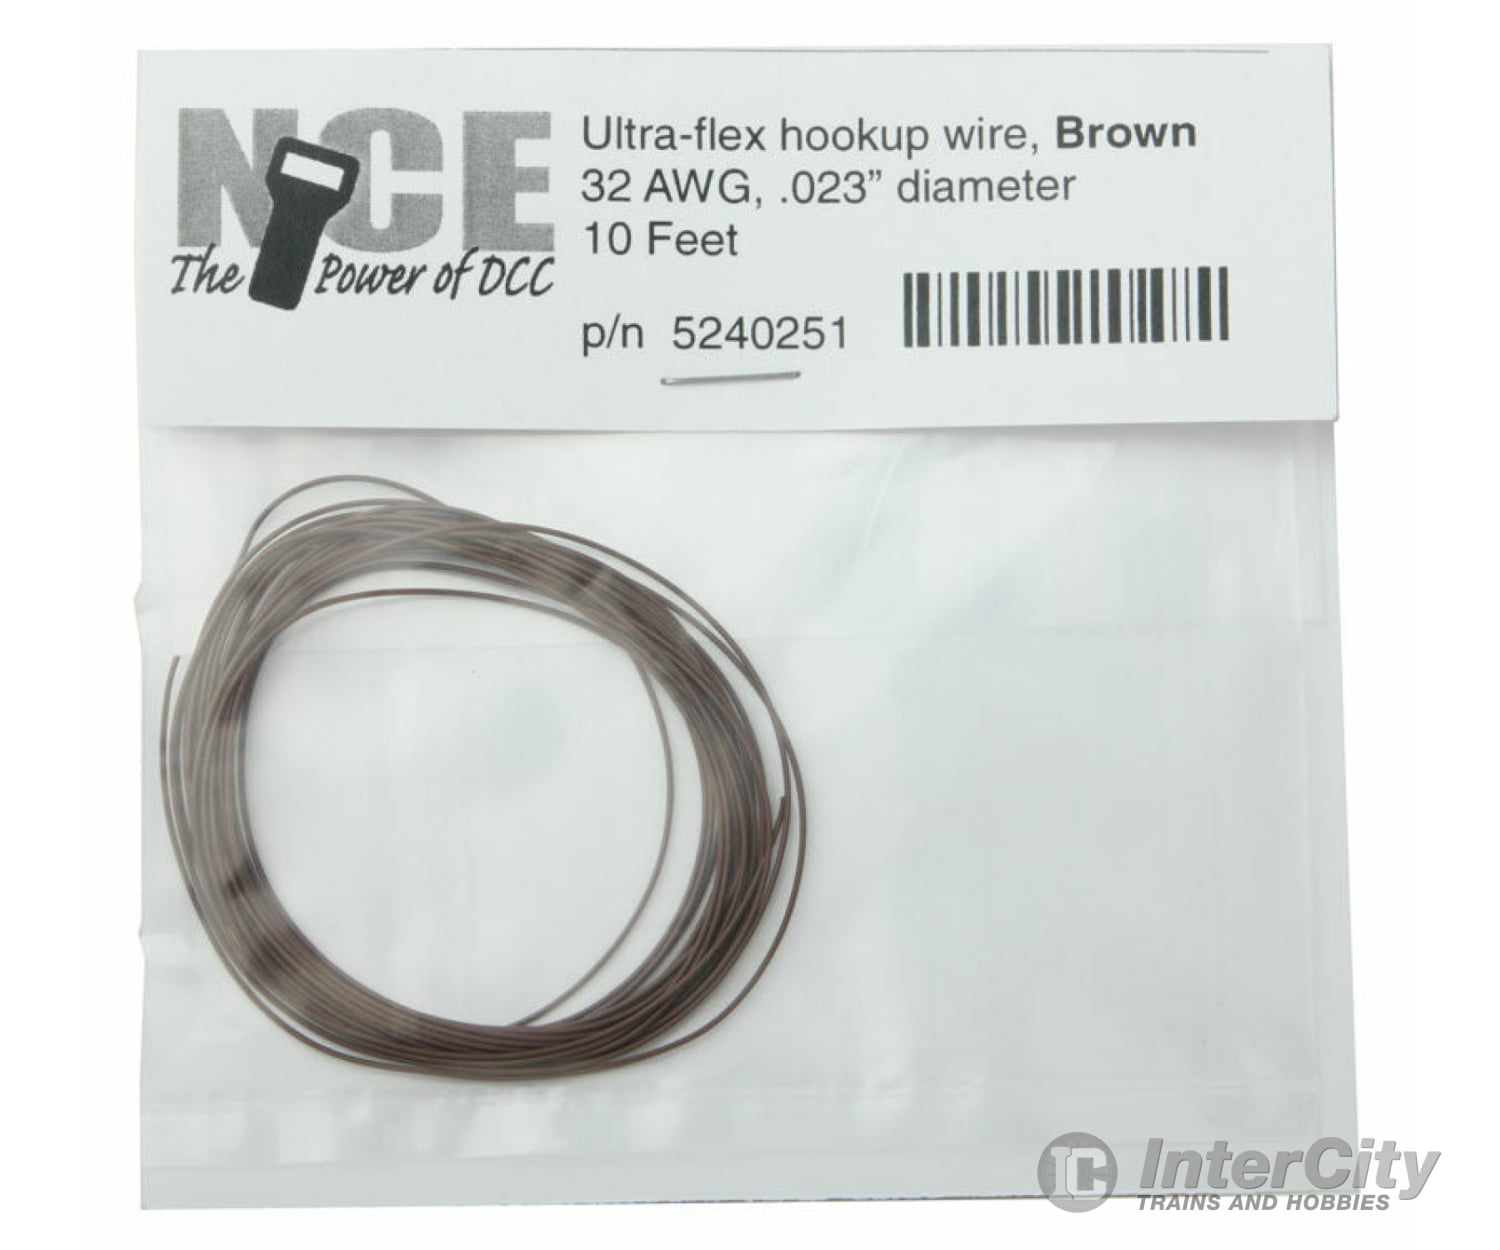 Nce 251 Ultraflex Hook - Up 32Awg.023 Diameter Wire - - Brown 10’ 3.05M Dcc Accessories